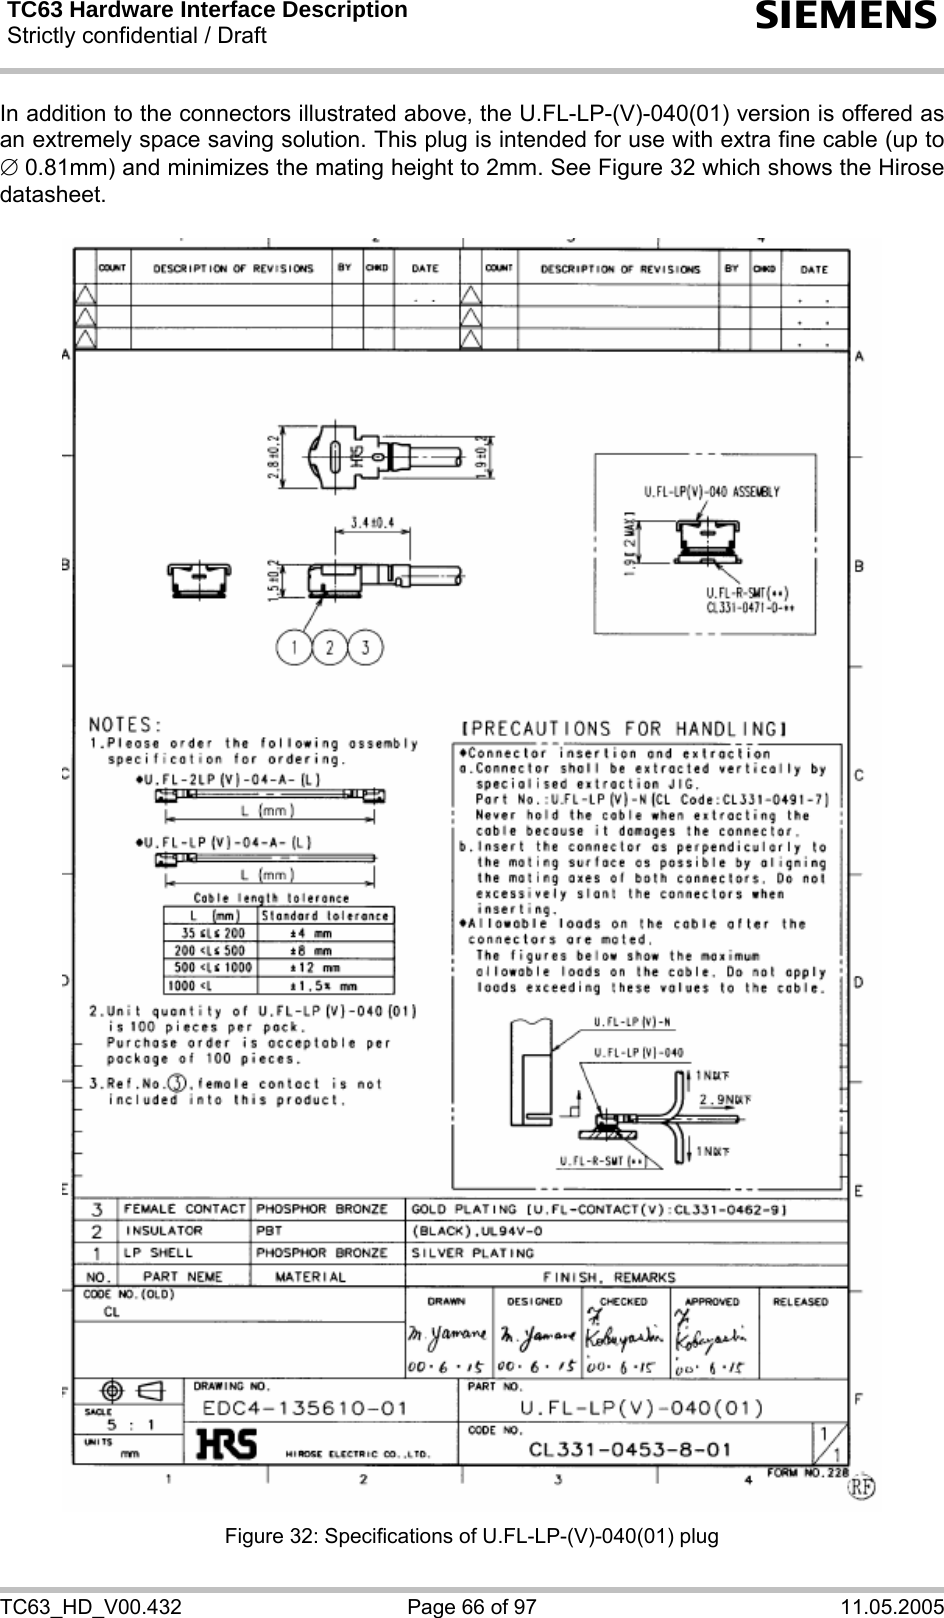 TC63 Hardware Interface Description Strictly confidential / Draft  s TC63_HD_V00.432  Page 66 of 97  11.05.2005 In addition to the connectors illustrated above, the U.FL-LP-(V)-040(01) version is offered as an extremely space saving solution. This plug is intended for use with extra fine cable (up to ∅ 0.81mm) and minimizes the mating height to 2mm. See Figure 32 which shows the Hirose datasheet.    Figure 32: Specifications of U.FL-LP-(V)-040(01) plug 